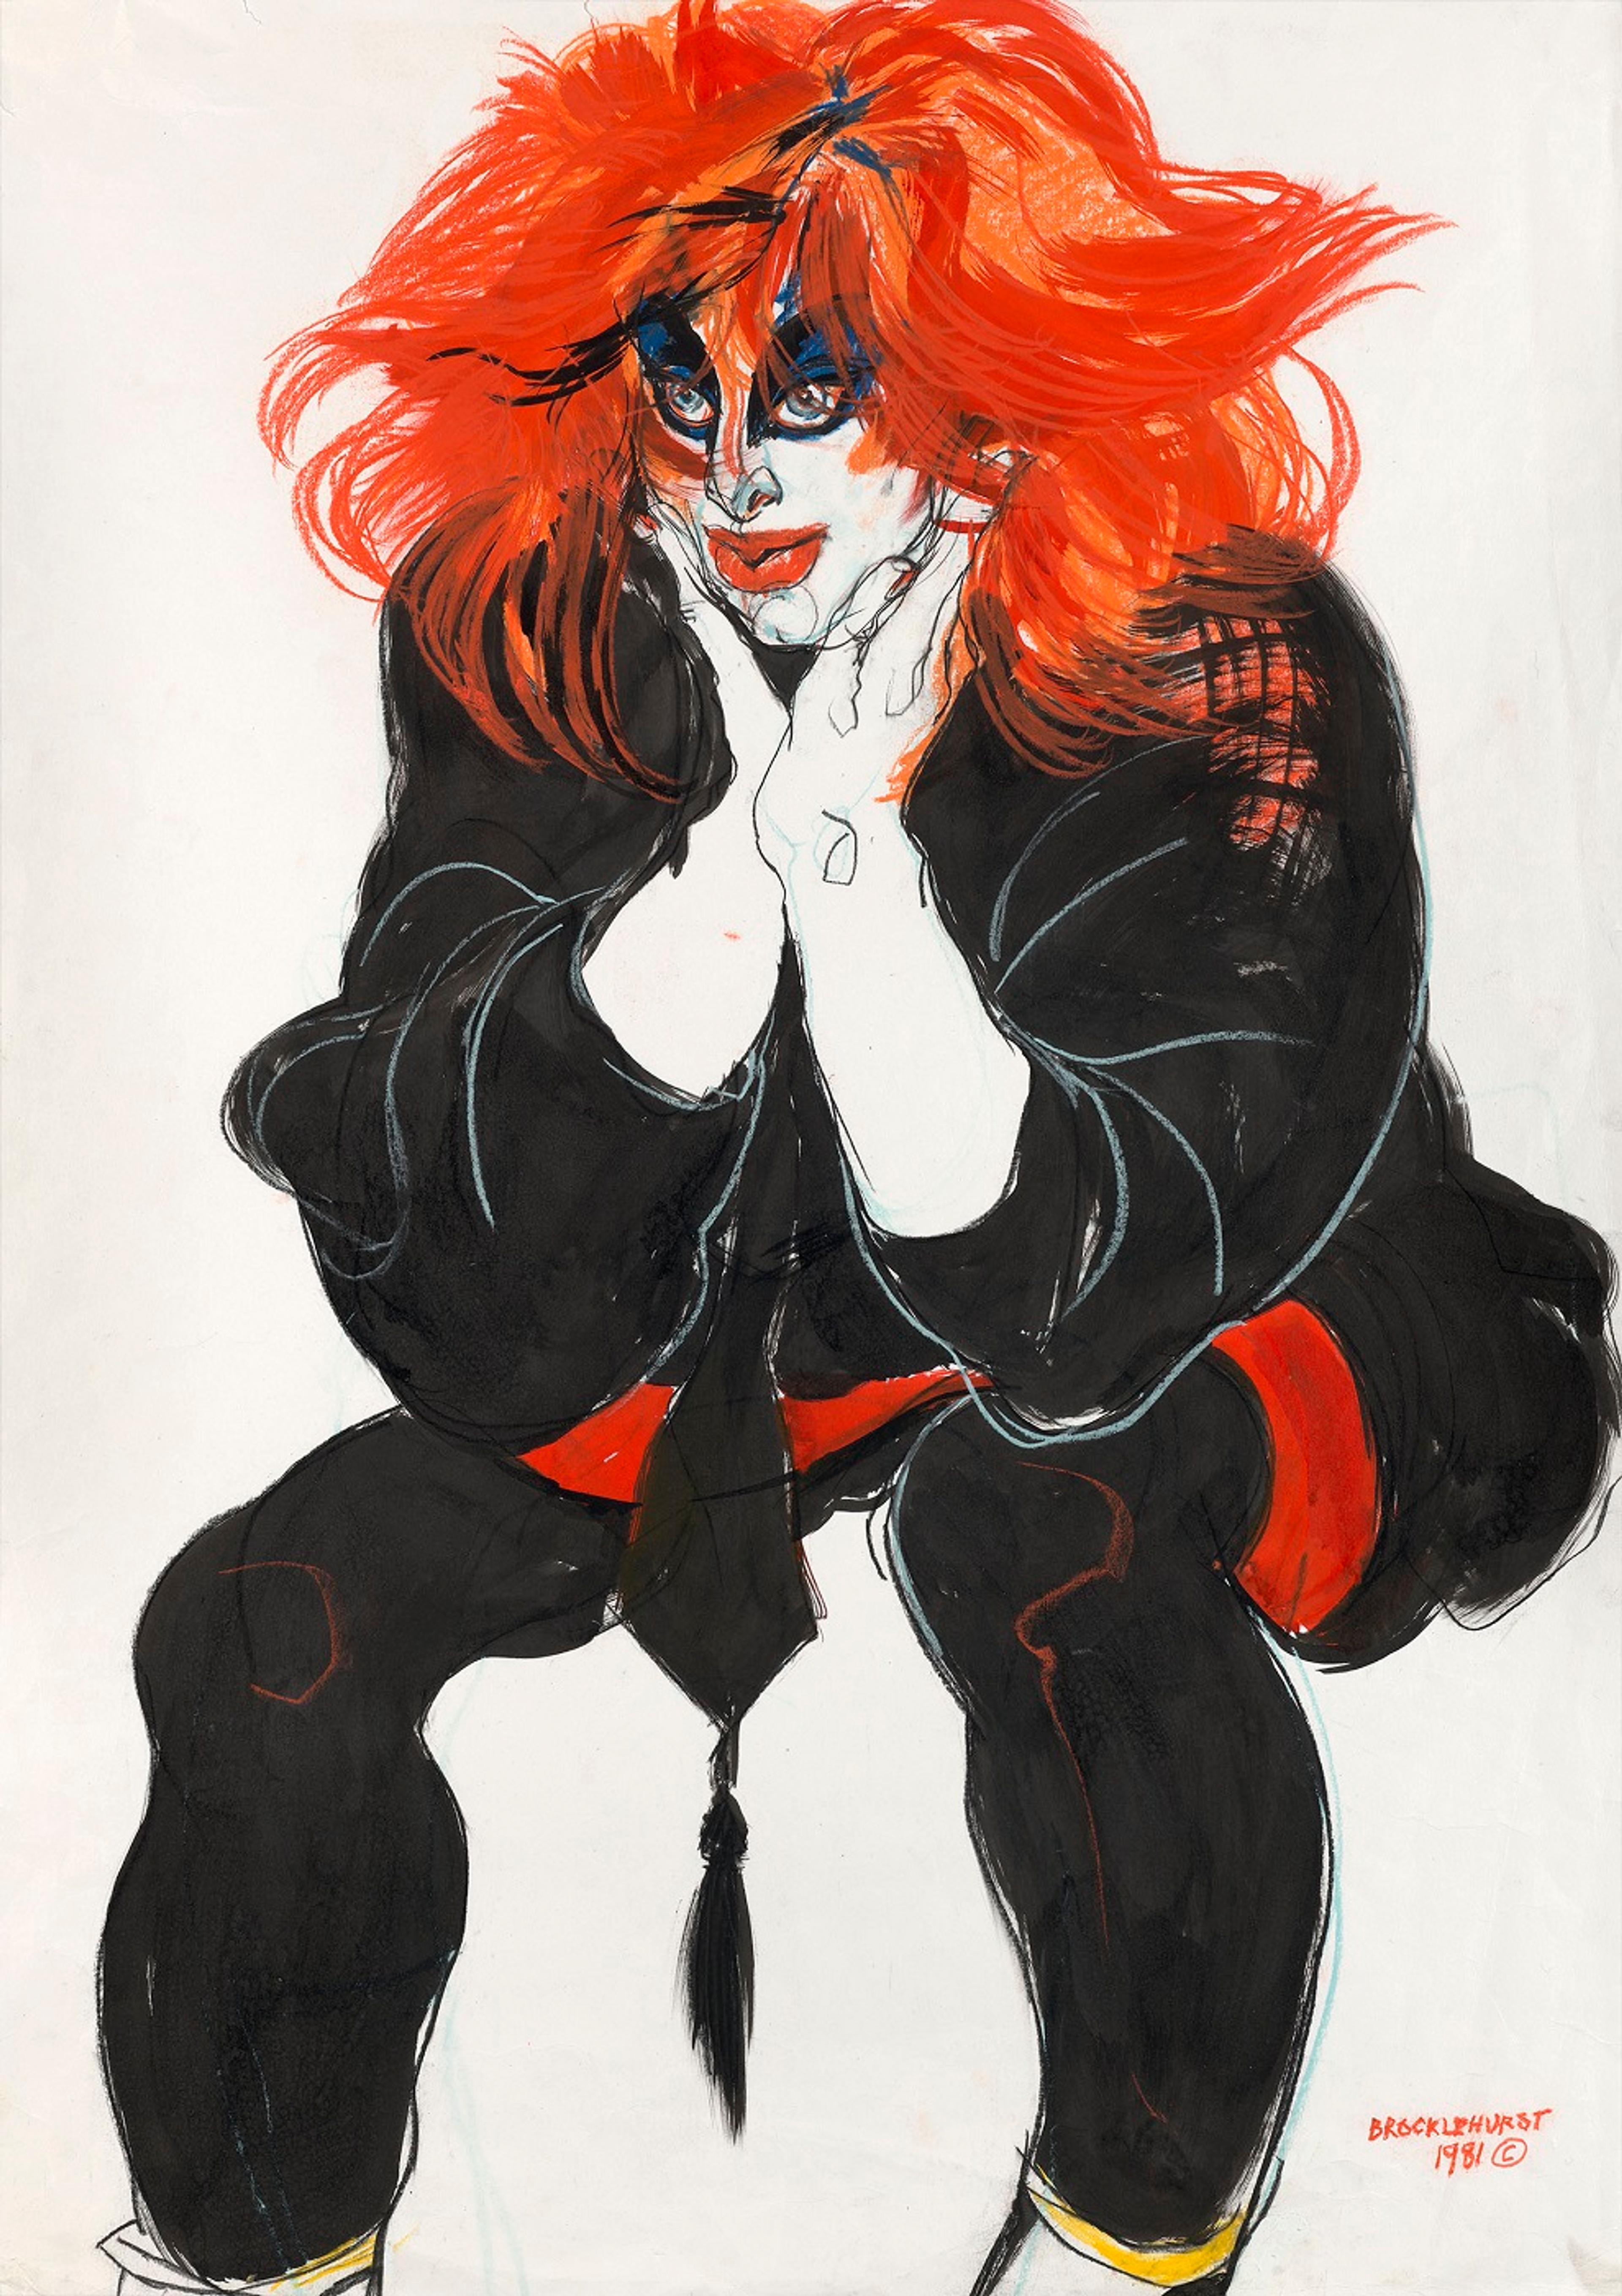 Drawing of a person sitting with their chin in their hands with flowing red and orange hair and dramatic blue and black eye make up